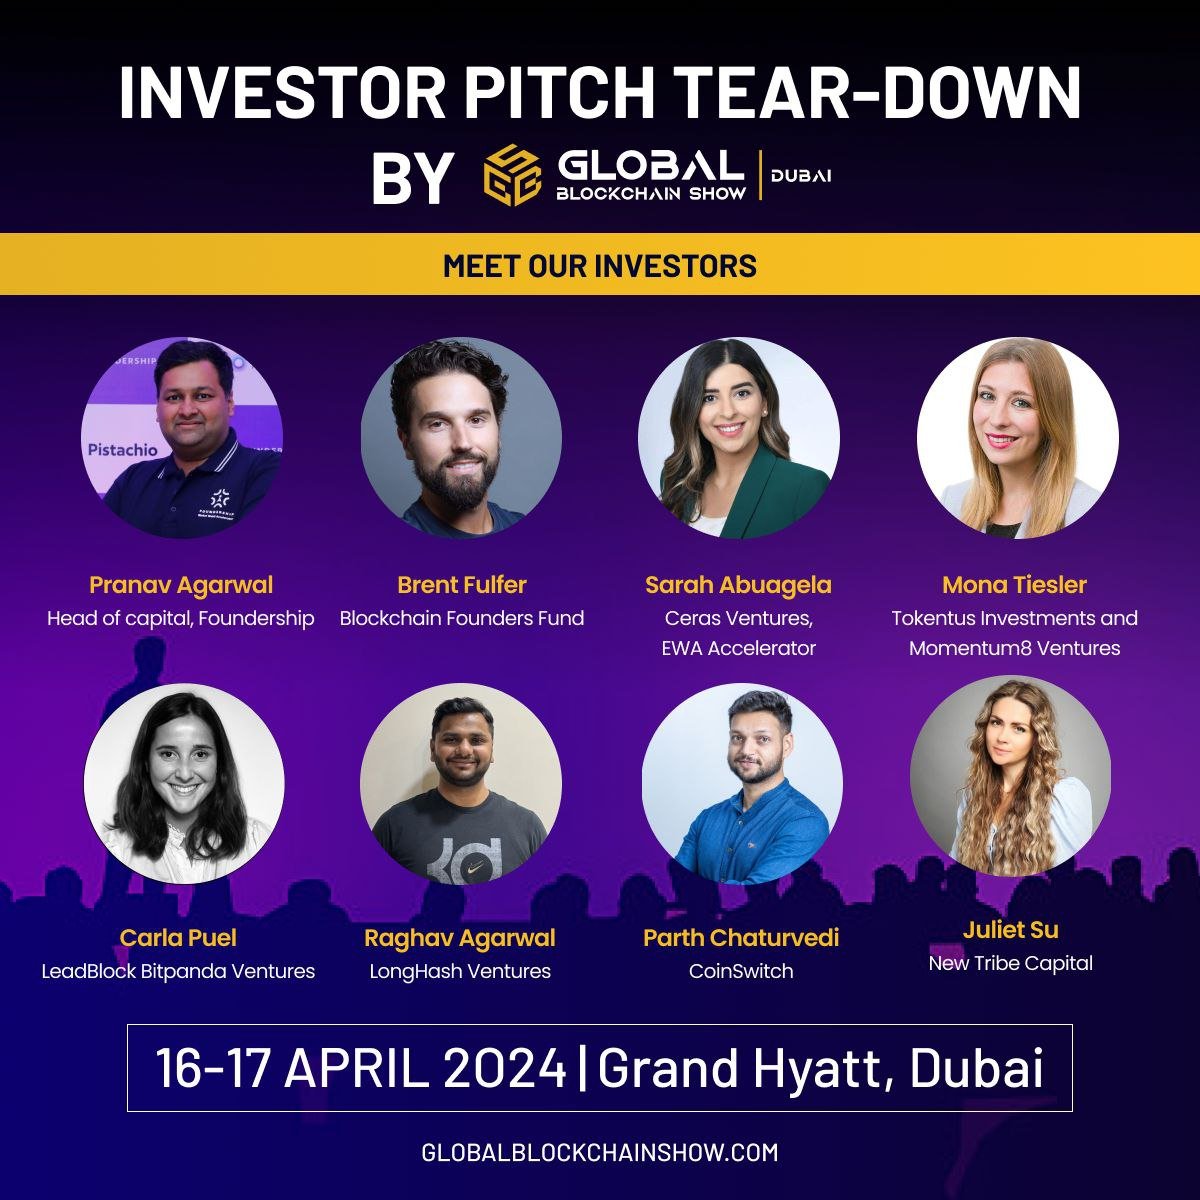 🌟 Don't Miss Out! 🌟 ​Join us at the Global Blockchain Show for an exclusive opportunity! We are hosting a special 1:1 pitch teardown session on April 17th, from 12:00 to 13:30, along with @FoundershipHQ and @NewTribeCap at Grand Hyatt Dubai. ​Here's what's in store:…